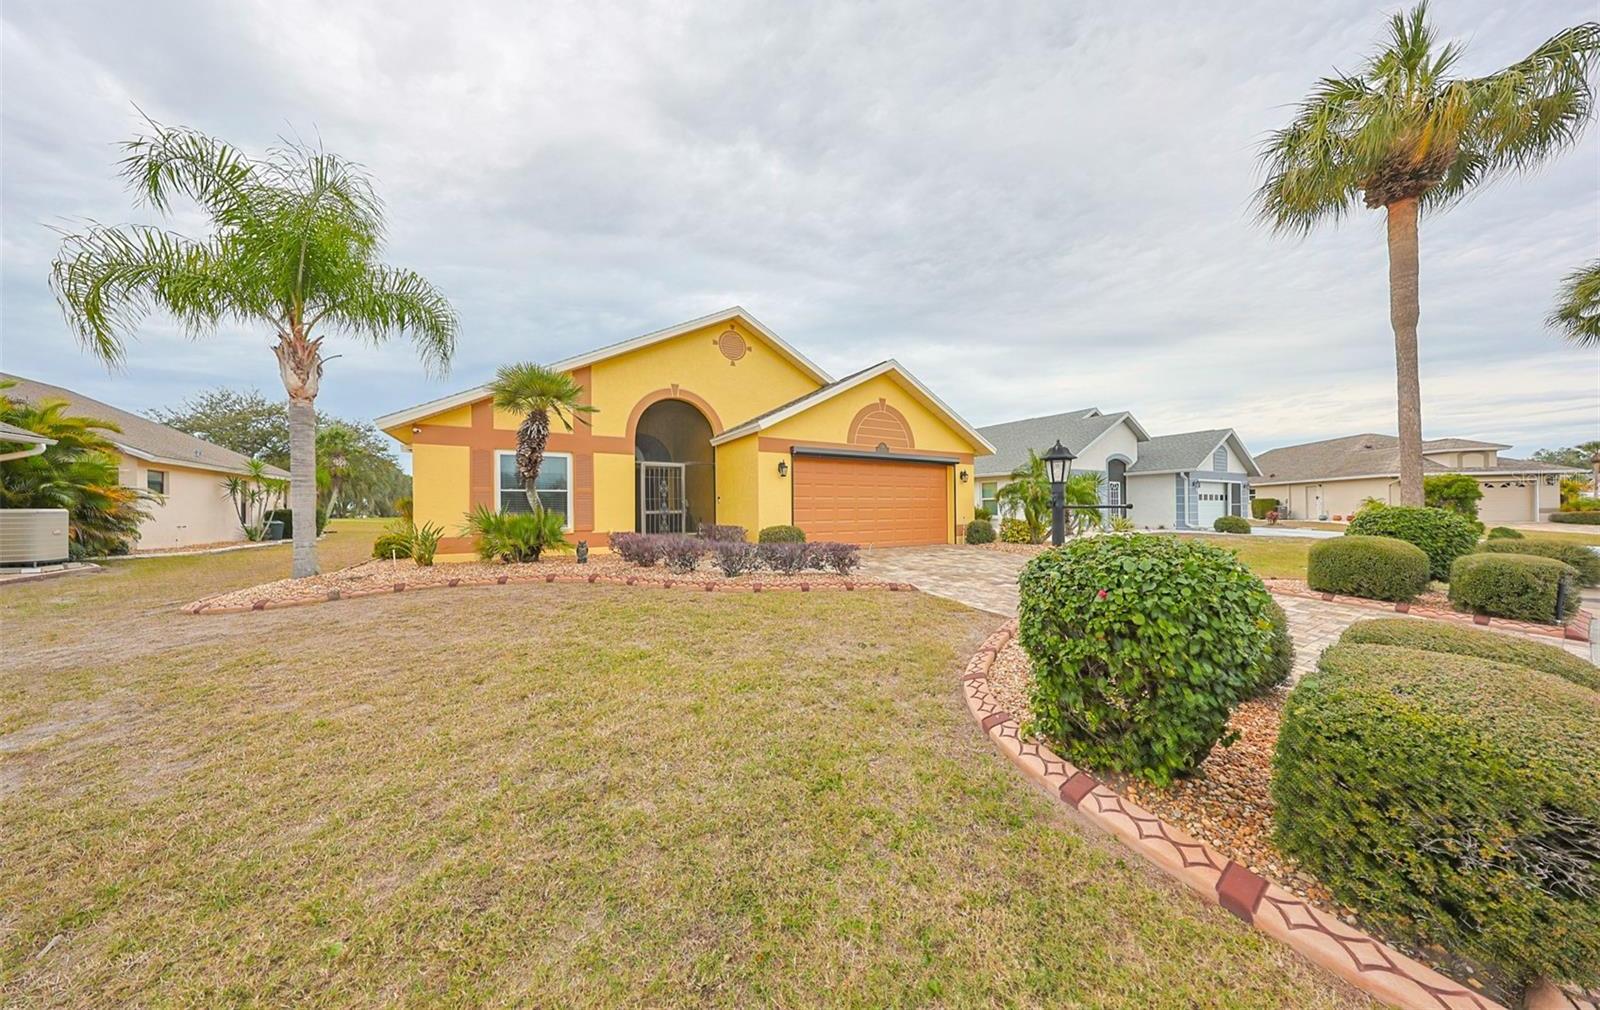 Photo one of 332 Northway Dr Sun City Center FL 33573 | MLS T3494462